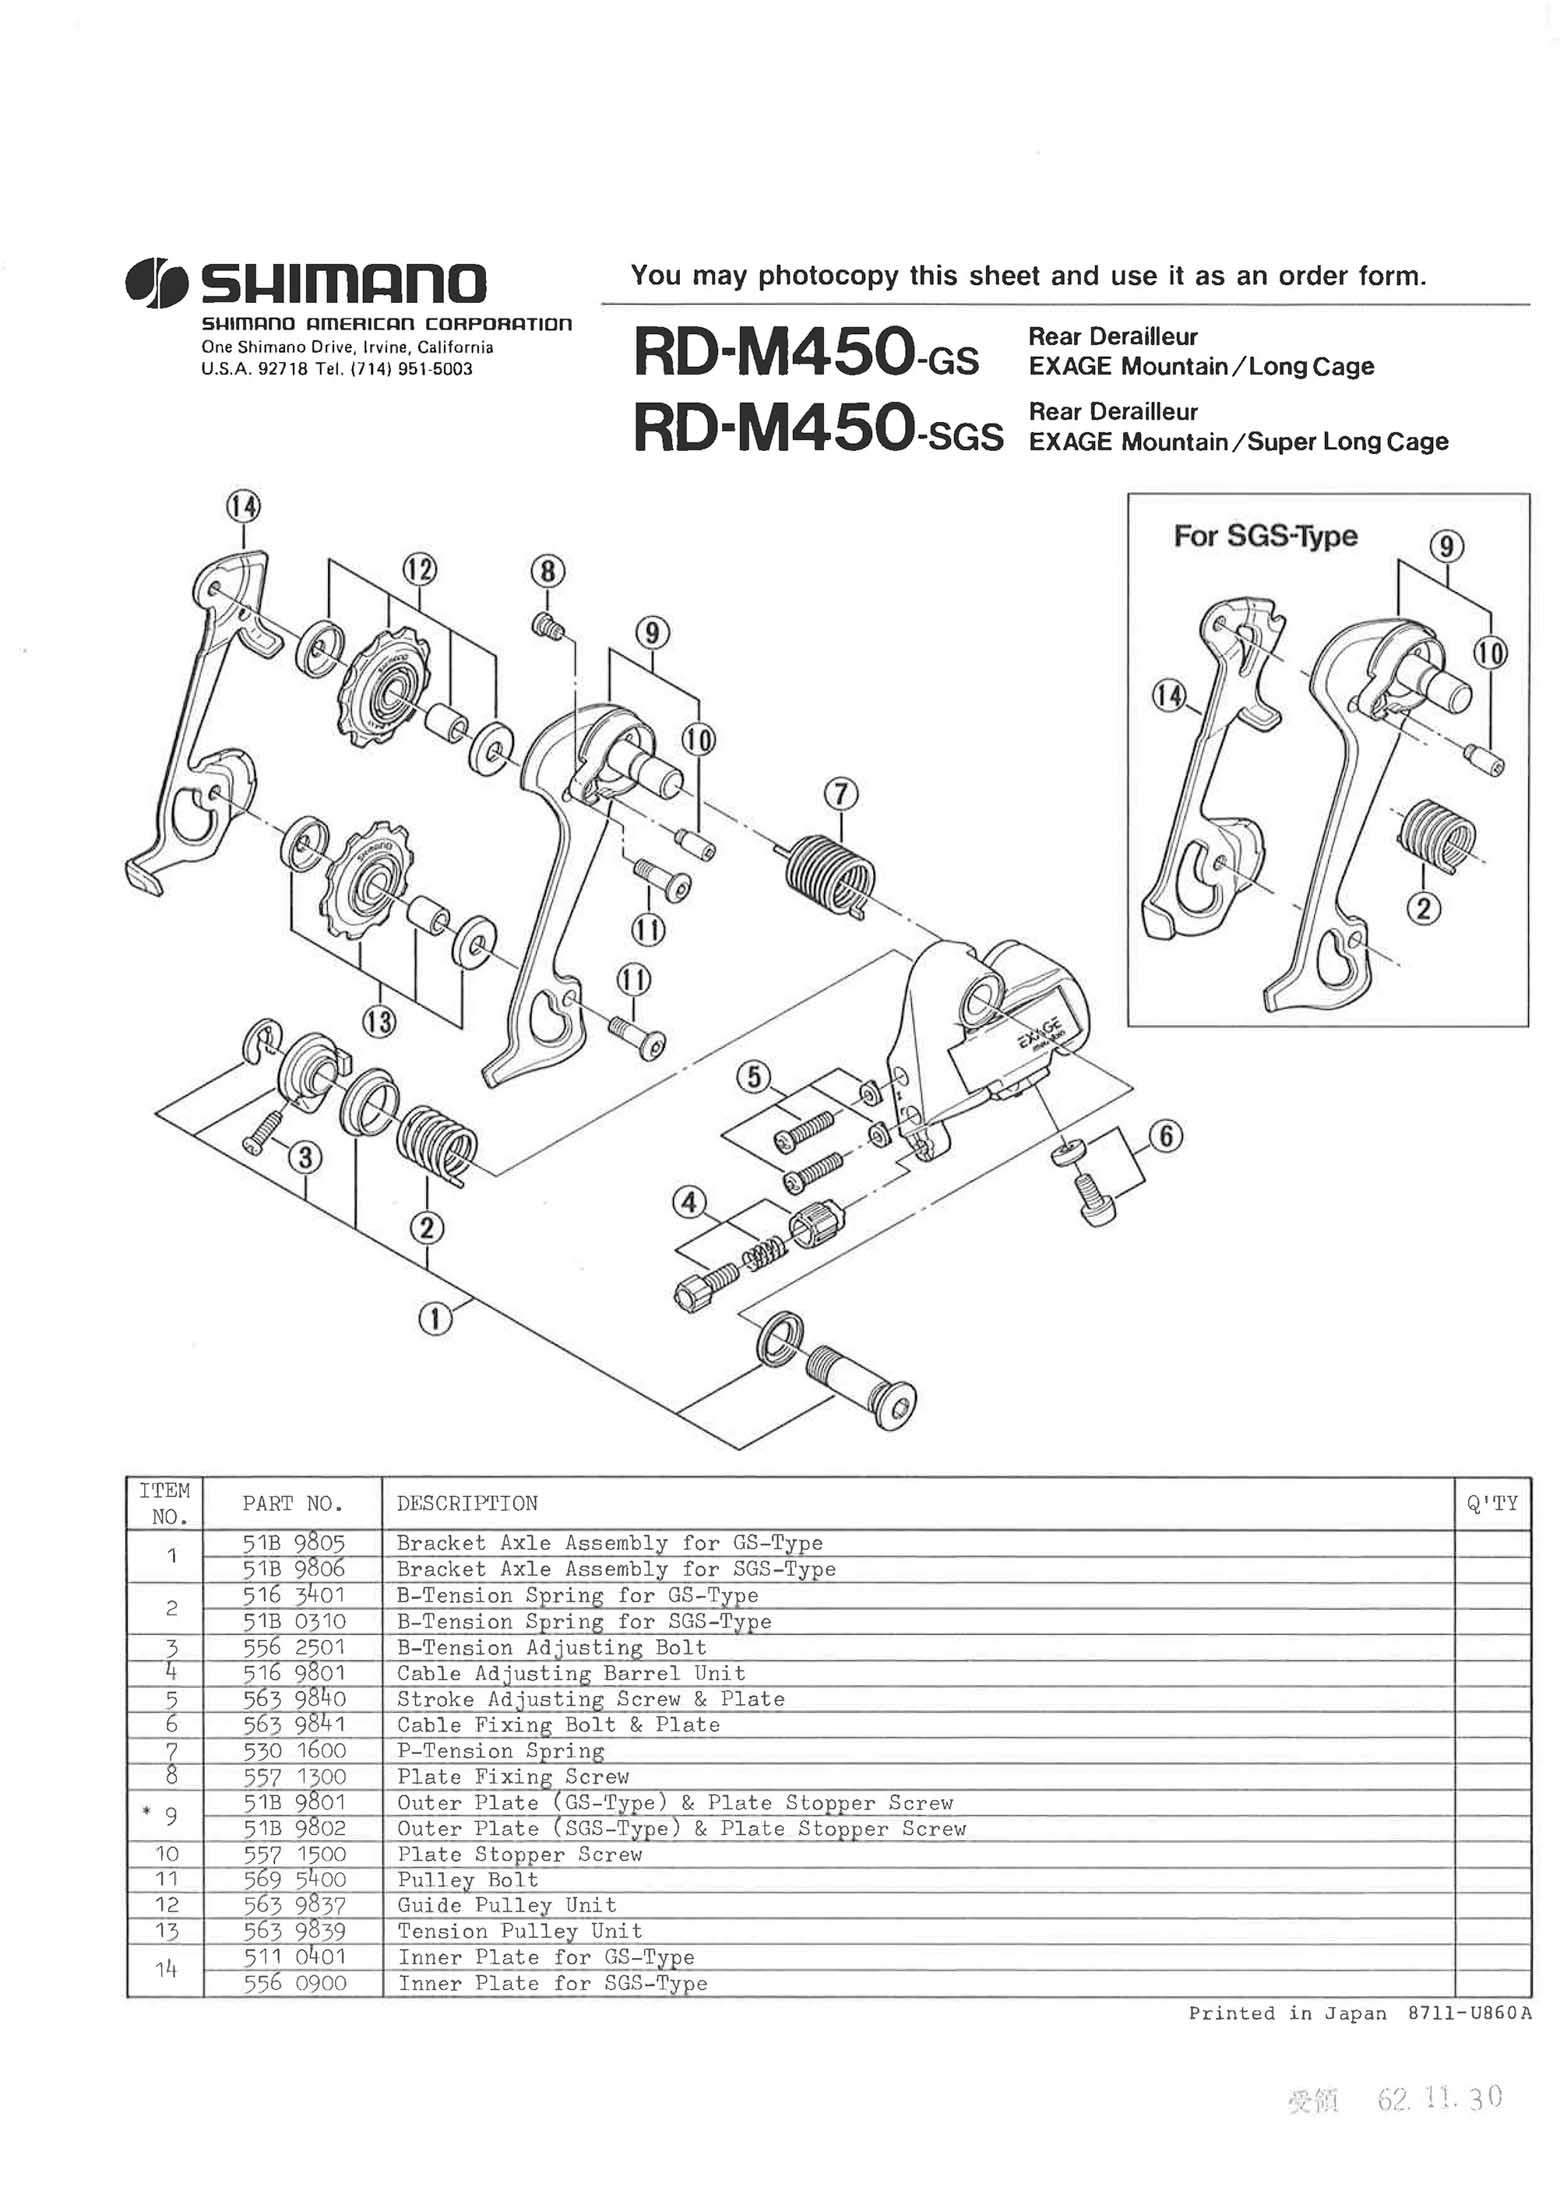 Shimano web site 2020 - exploded views from 1987 Exage Mountain (M450) main image